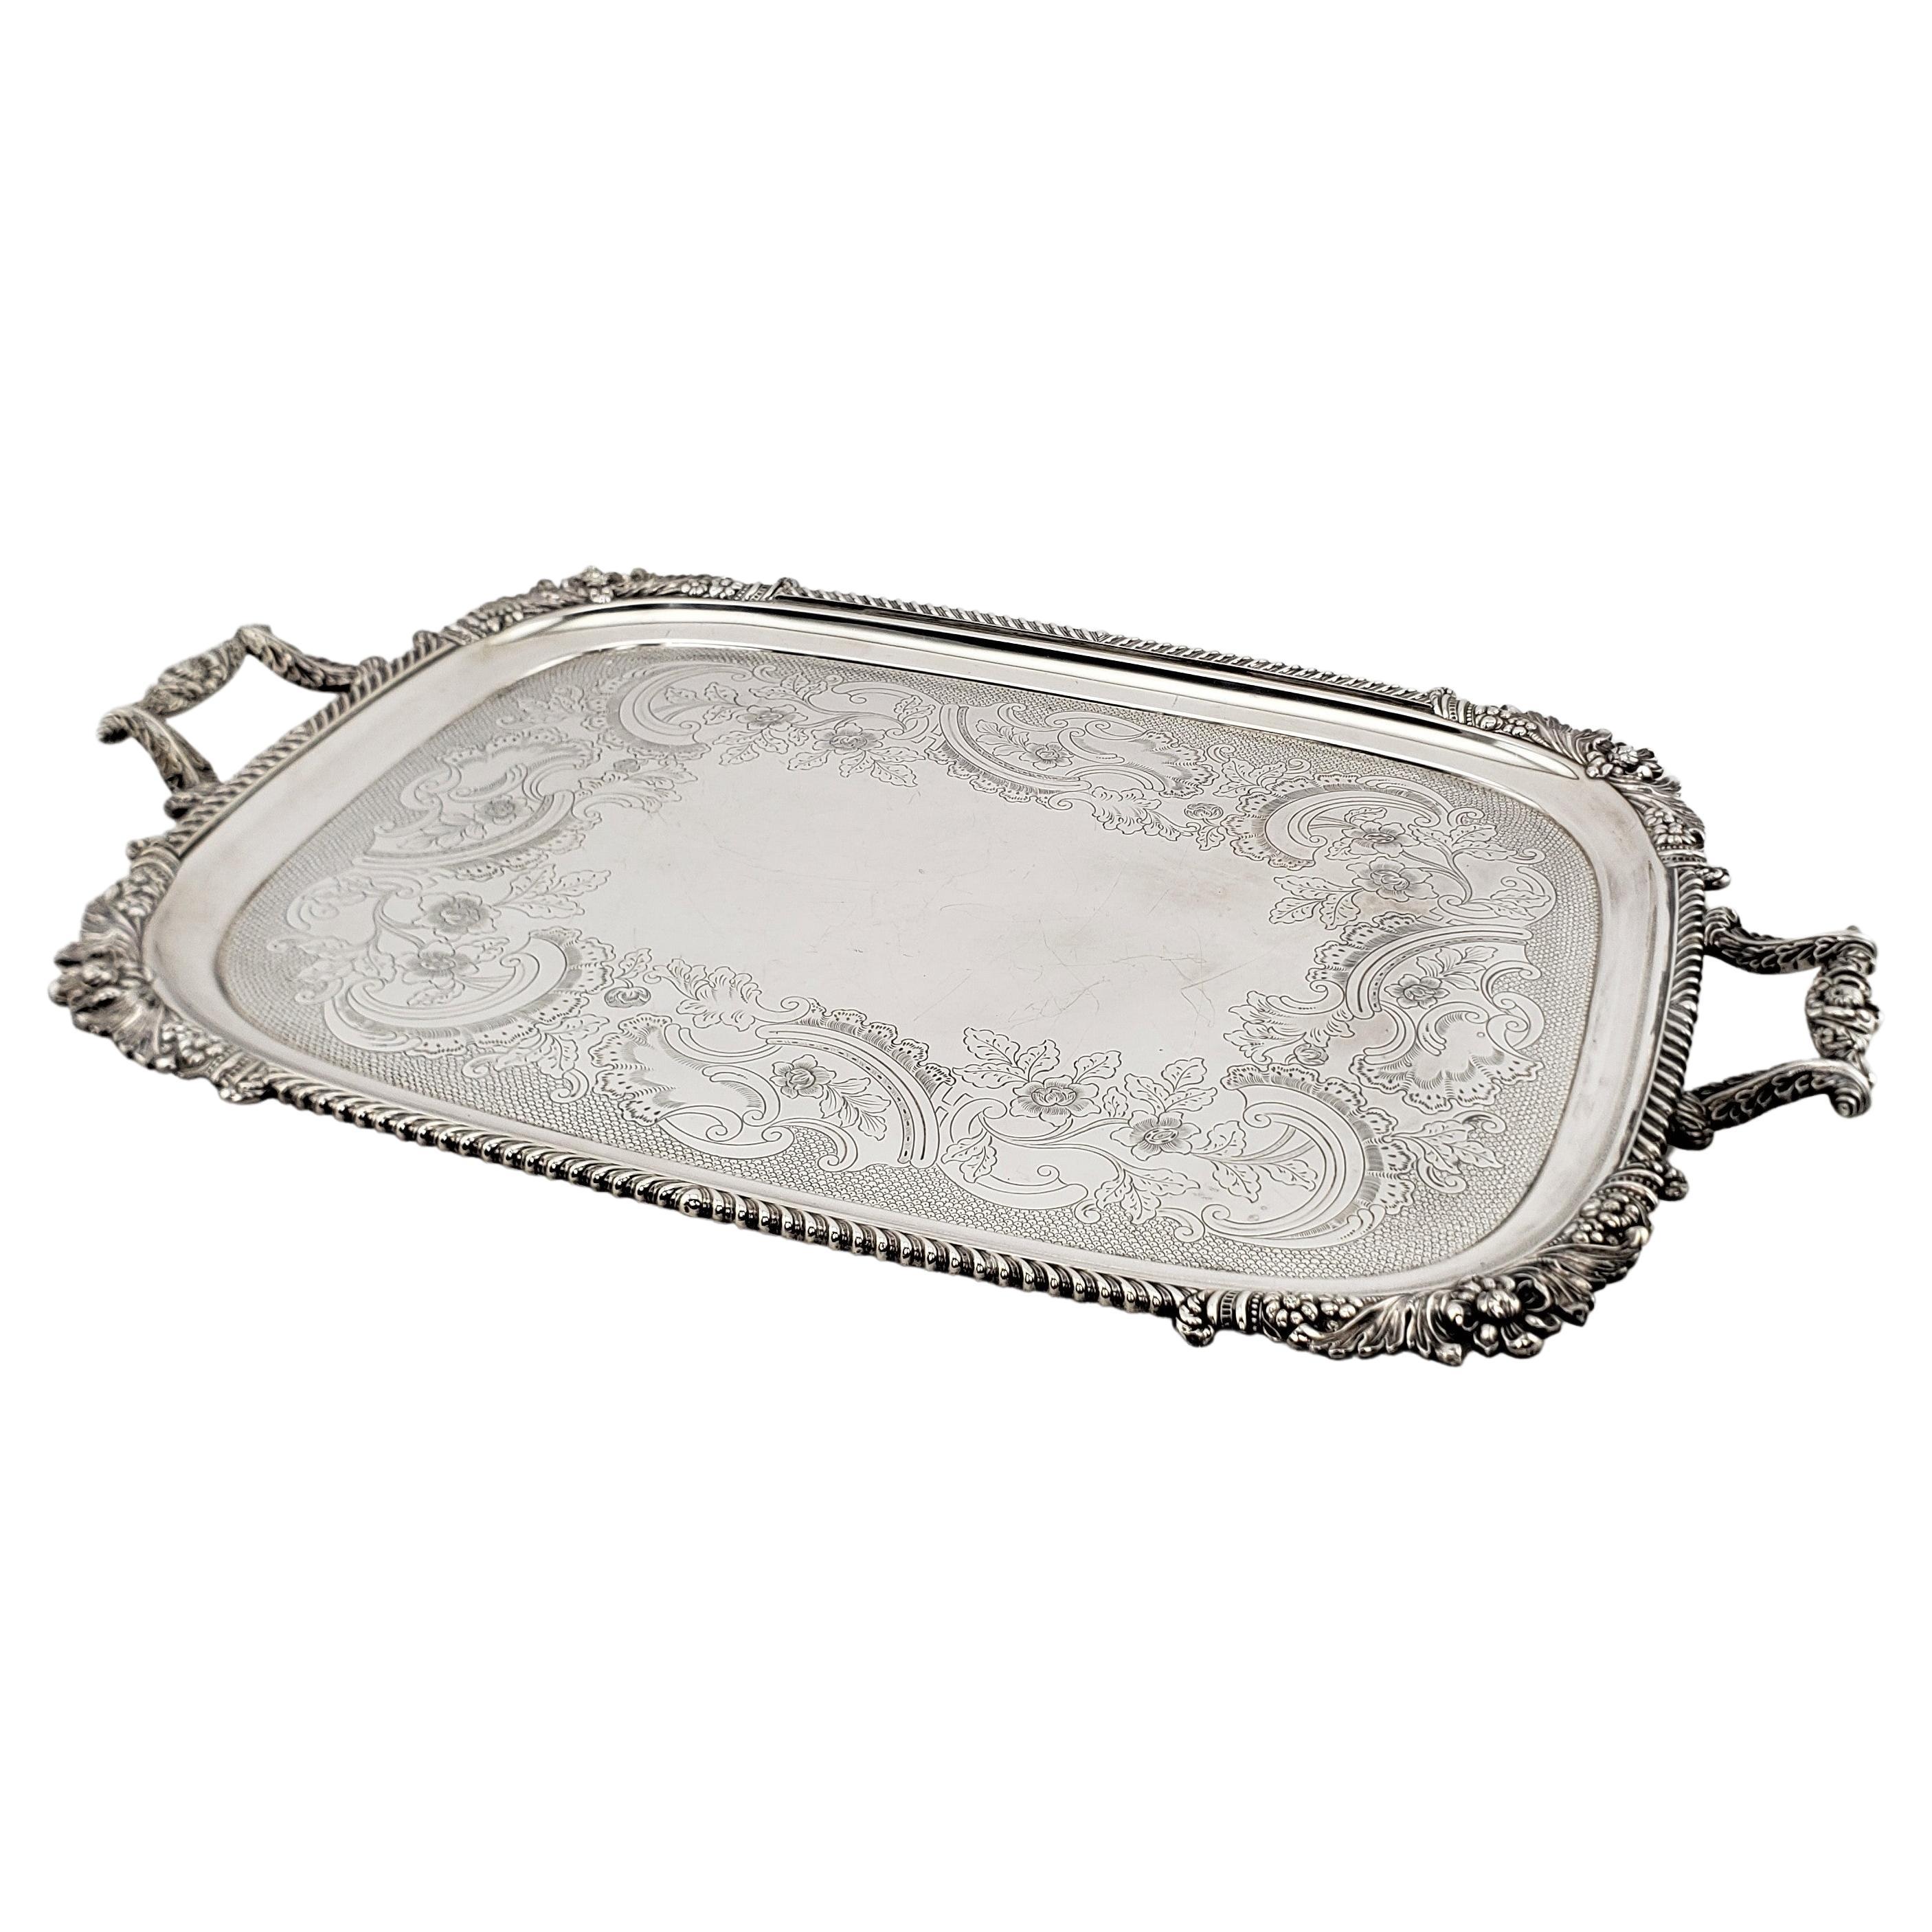 Large Barker Ellis Antique Silver Plated Serving Tray with Floral Decoration